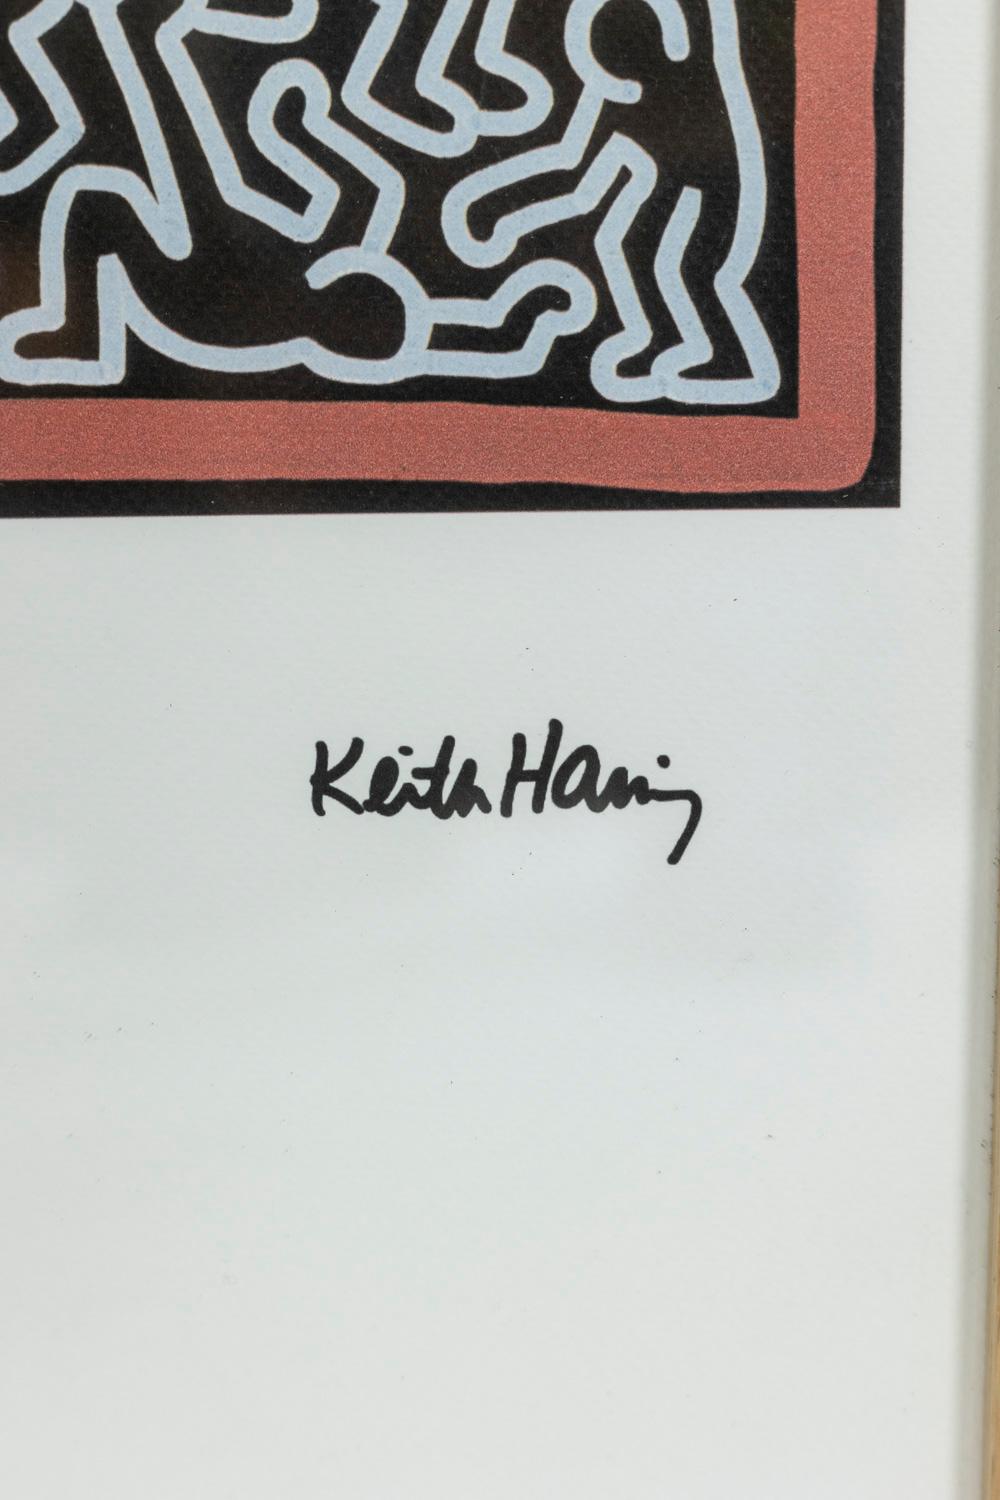 Chêne Keith Haring, lithographie, années 1990